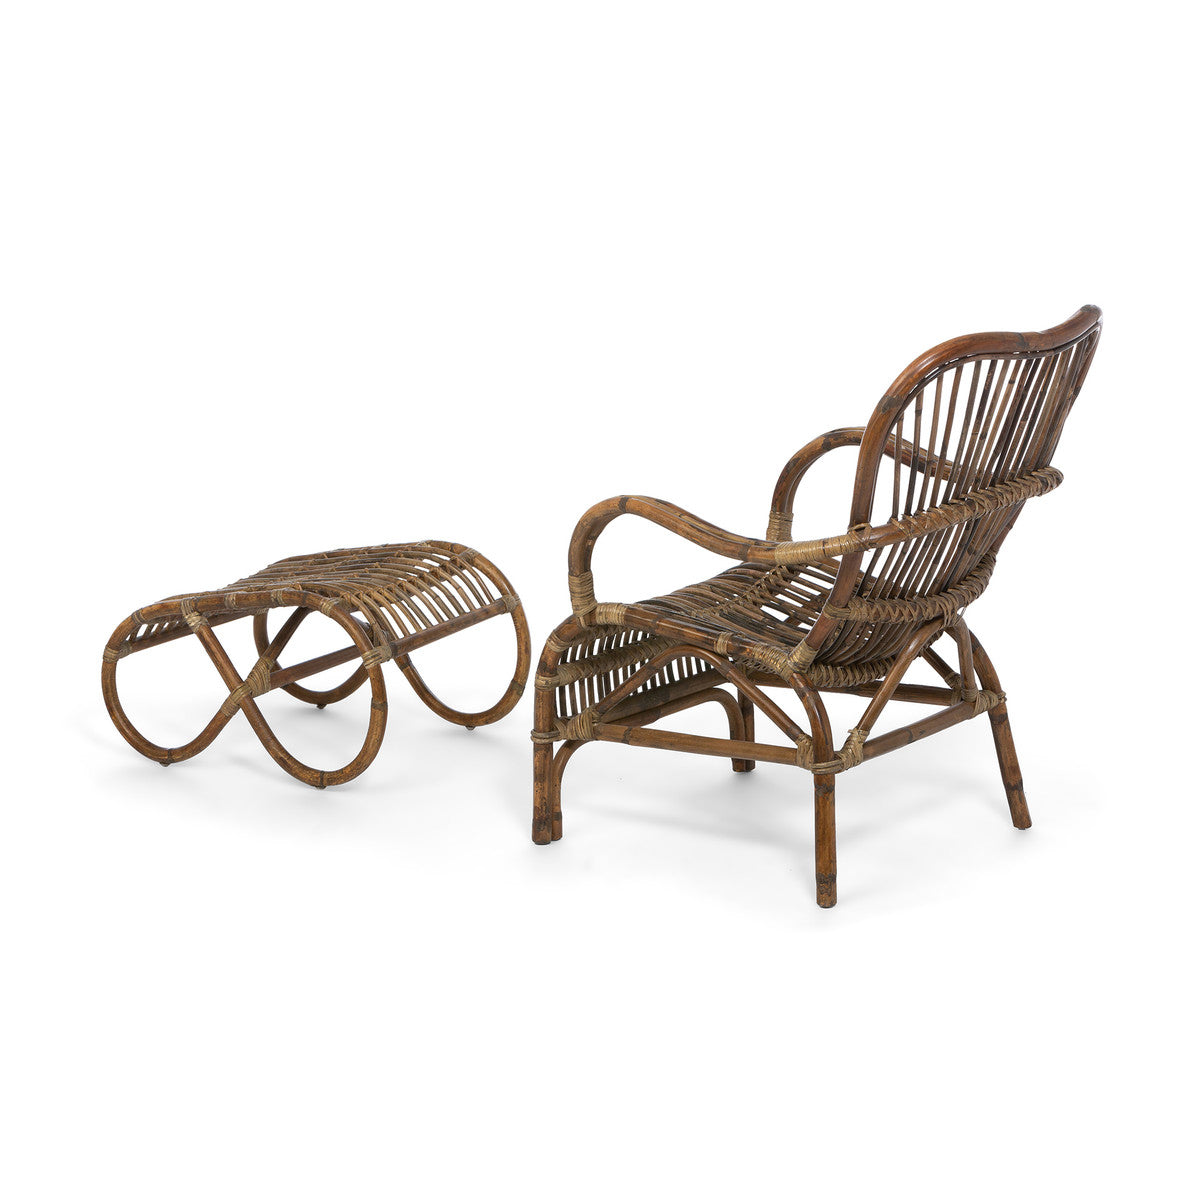 Savannah Rattan Lounge Chair and Footrest